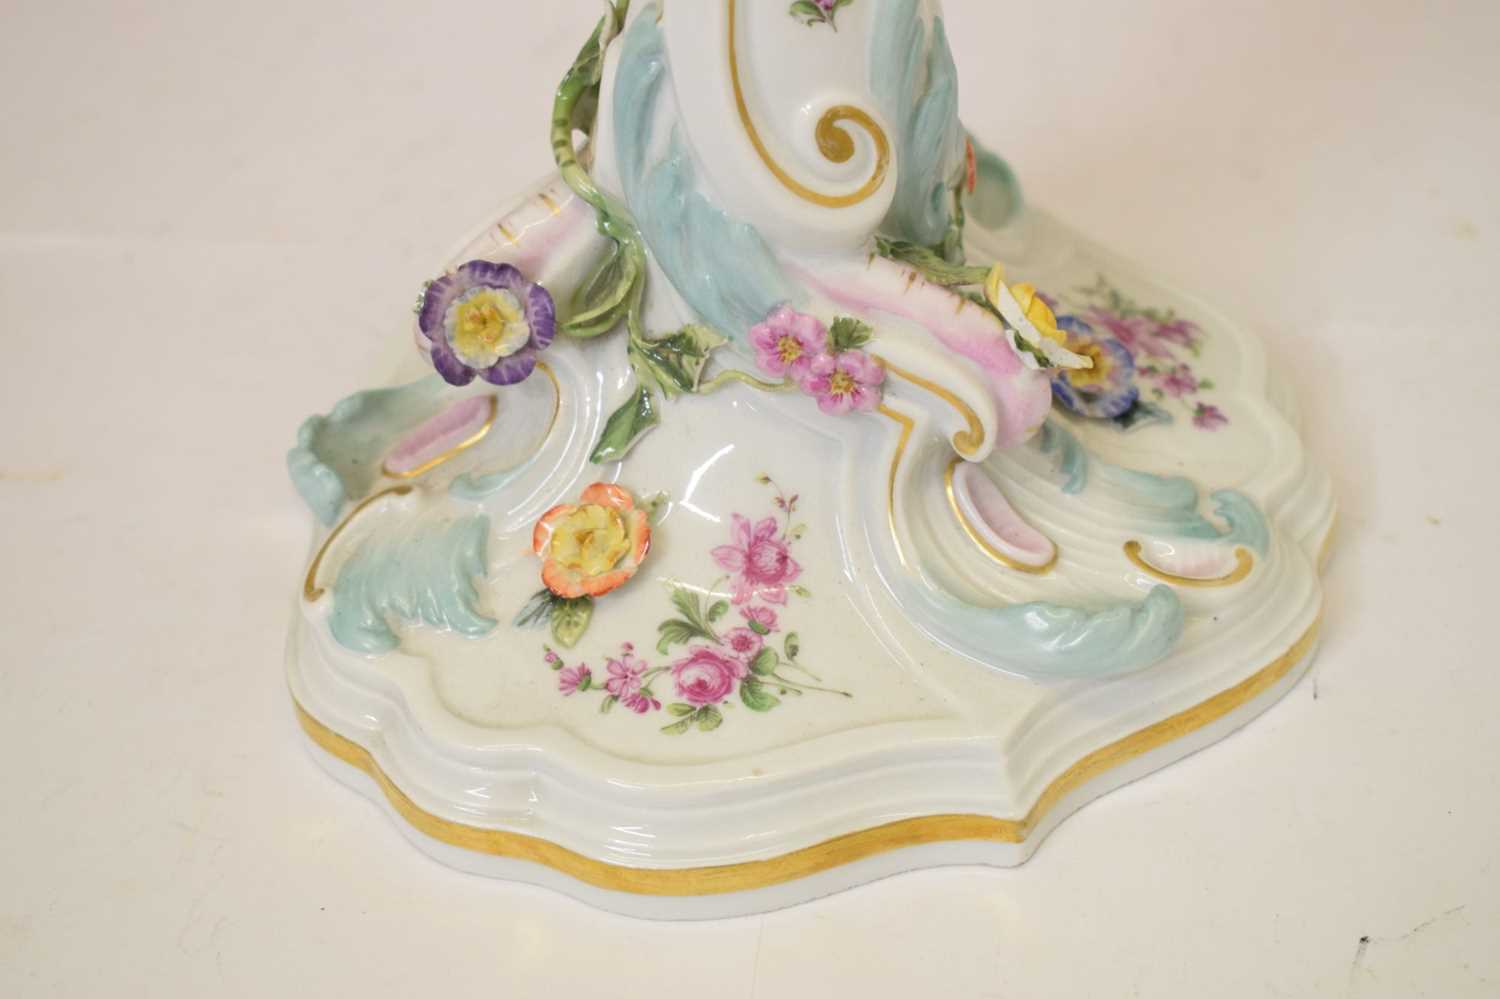 Late 19th/early 20th century Meissen porcelain candlestick - Image 8 of 9